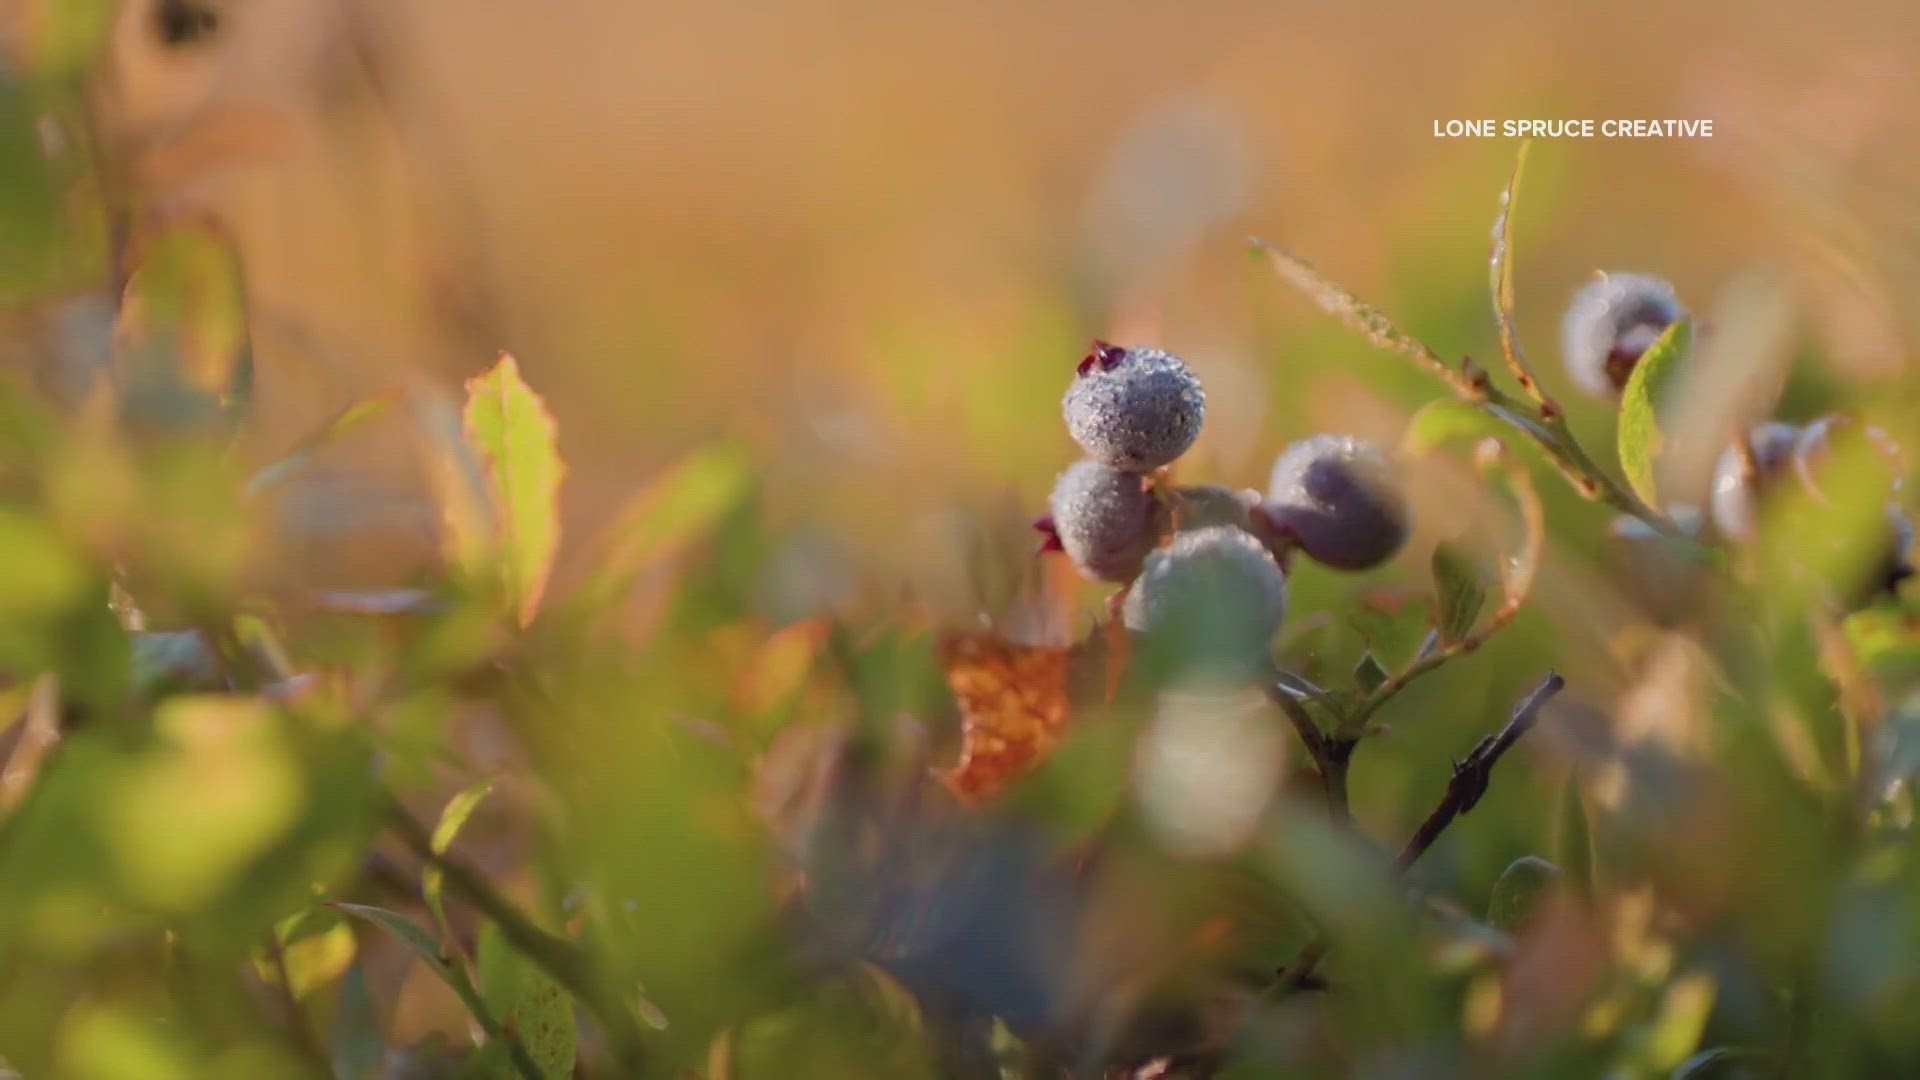 “Growing Wild” tells the story of the wild blueberry through the eyes of the people who steward it.